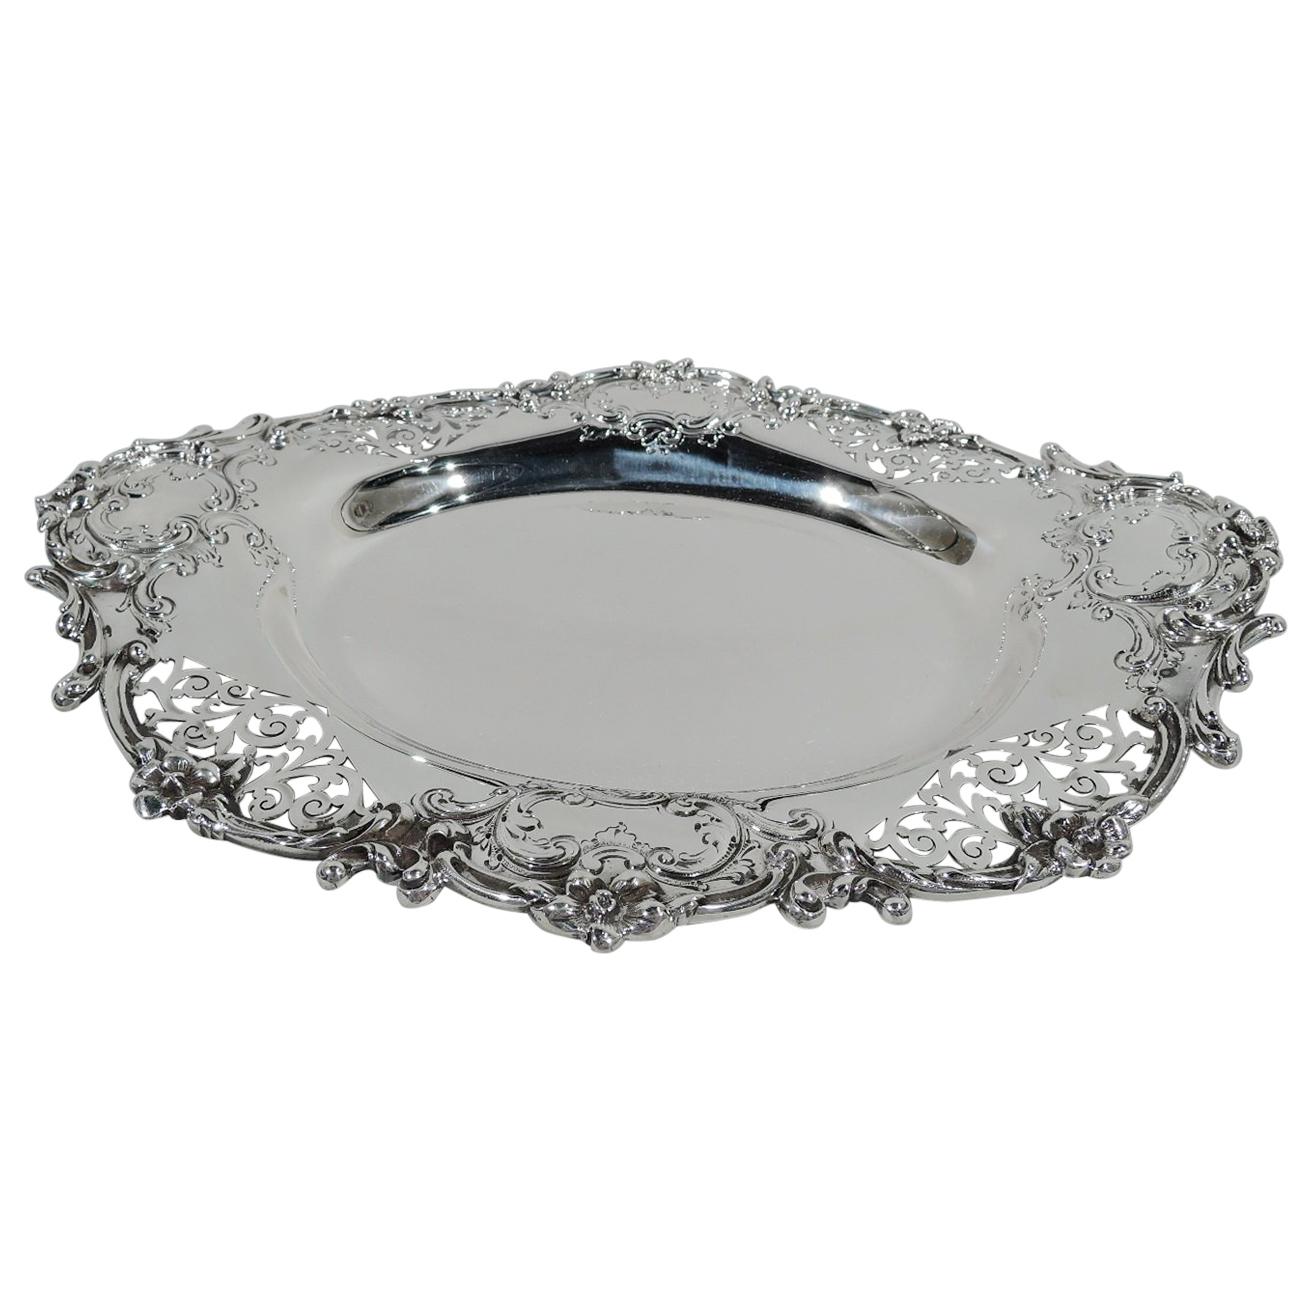 Fancy Antique American Sterling Silver Serving Dish by Howard & Co